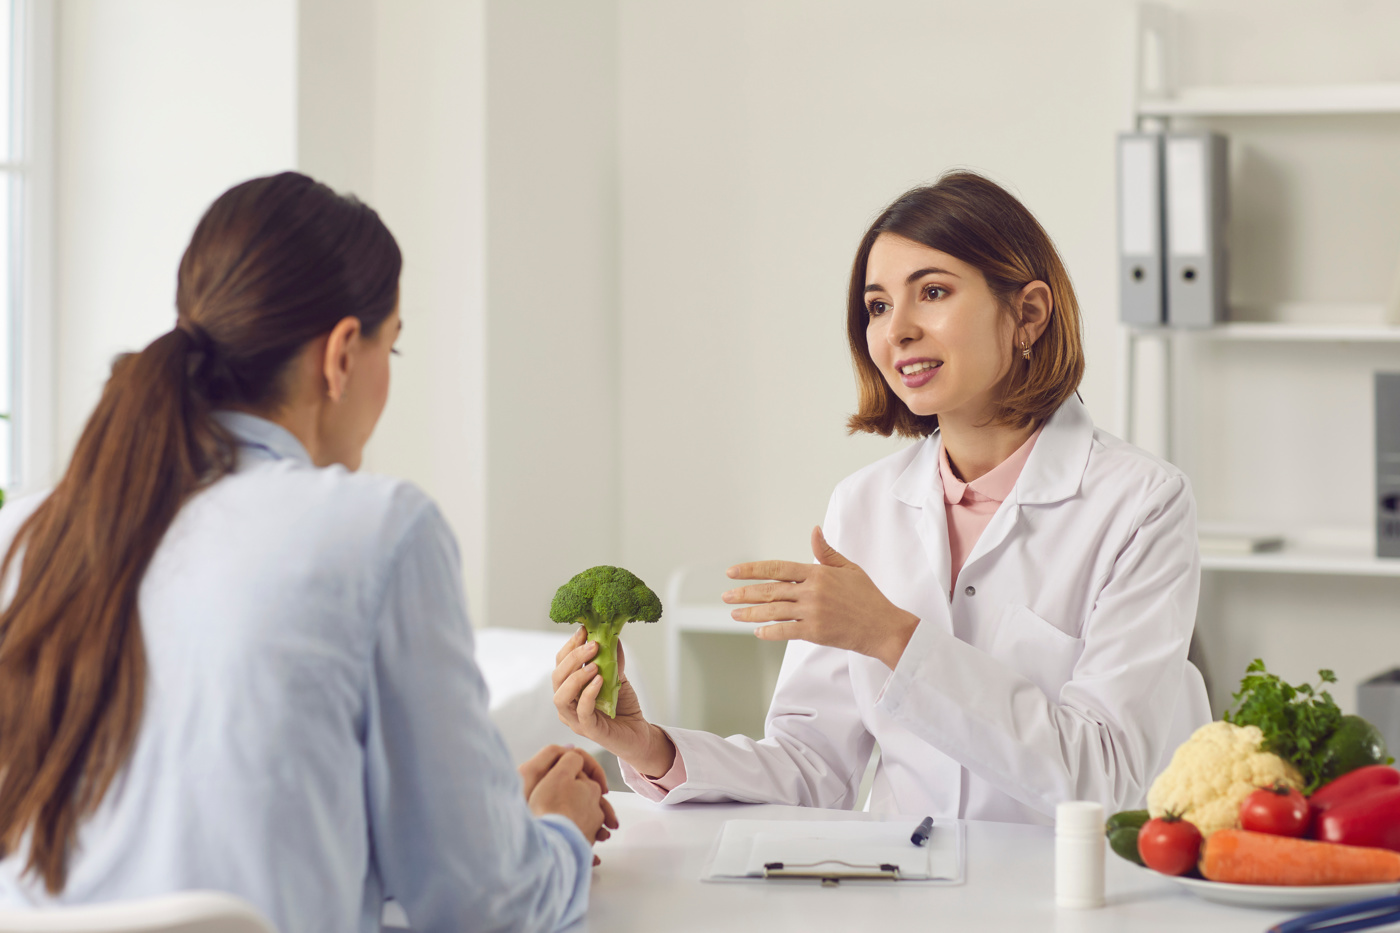 A nutritionist shows a client the benefits of a conscious and healthy diet.